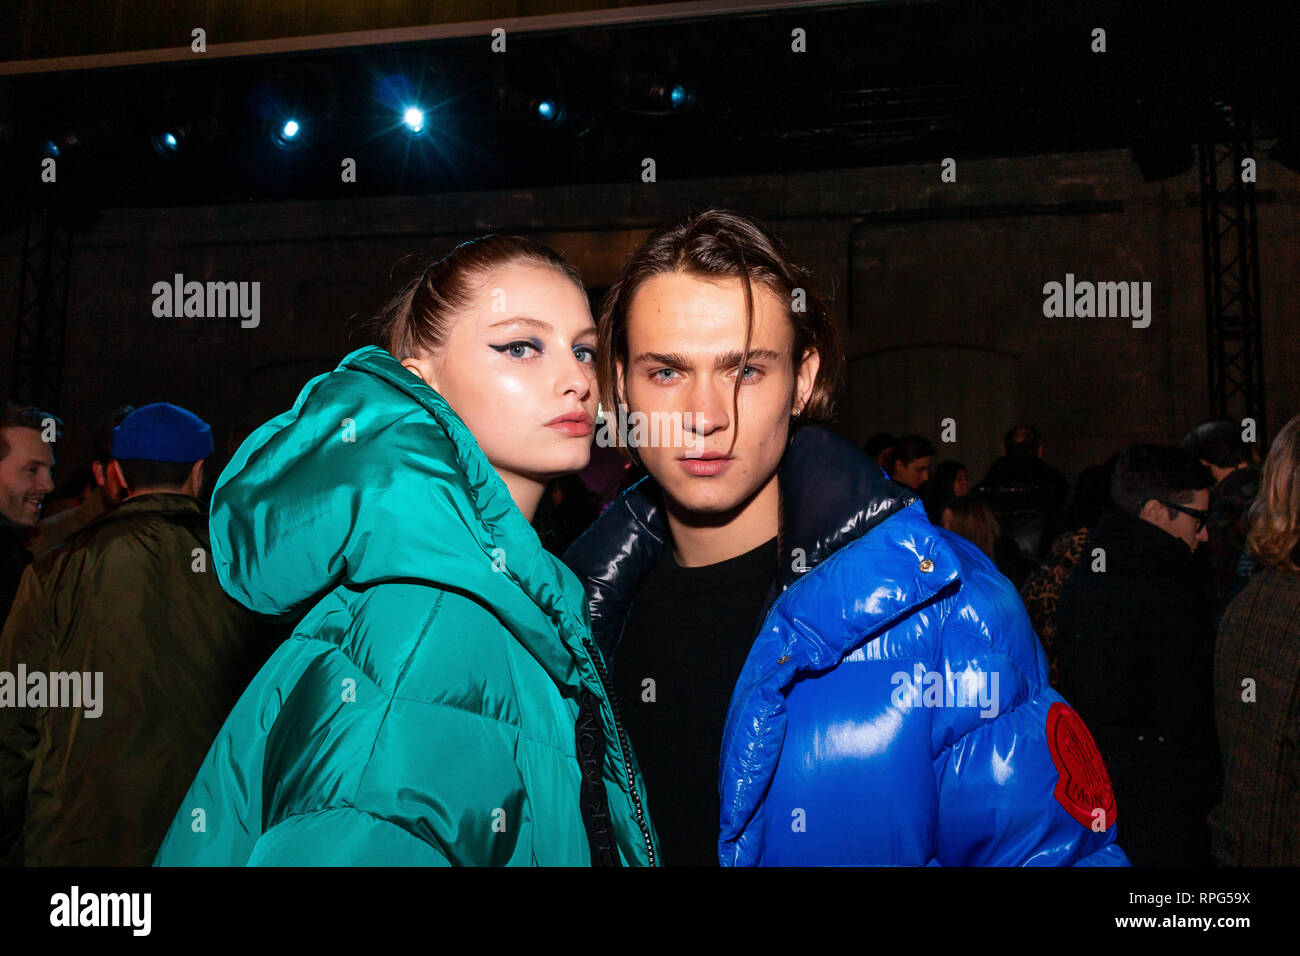 Milan, Italy. 20th Feb, 2019. Saul Nanni and Beatrice Vendramin seen  outside Moncler Show during Milan Fashion Week Autumn/Winter 2019/20  Credit: Alessandro Bremec/Pacific Press/Alamy Live News Stock Photo - Alamy